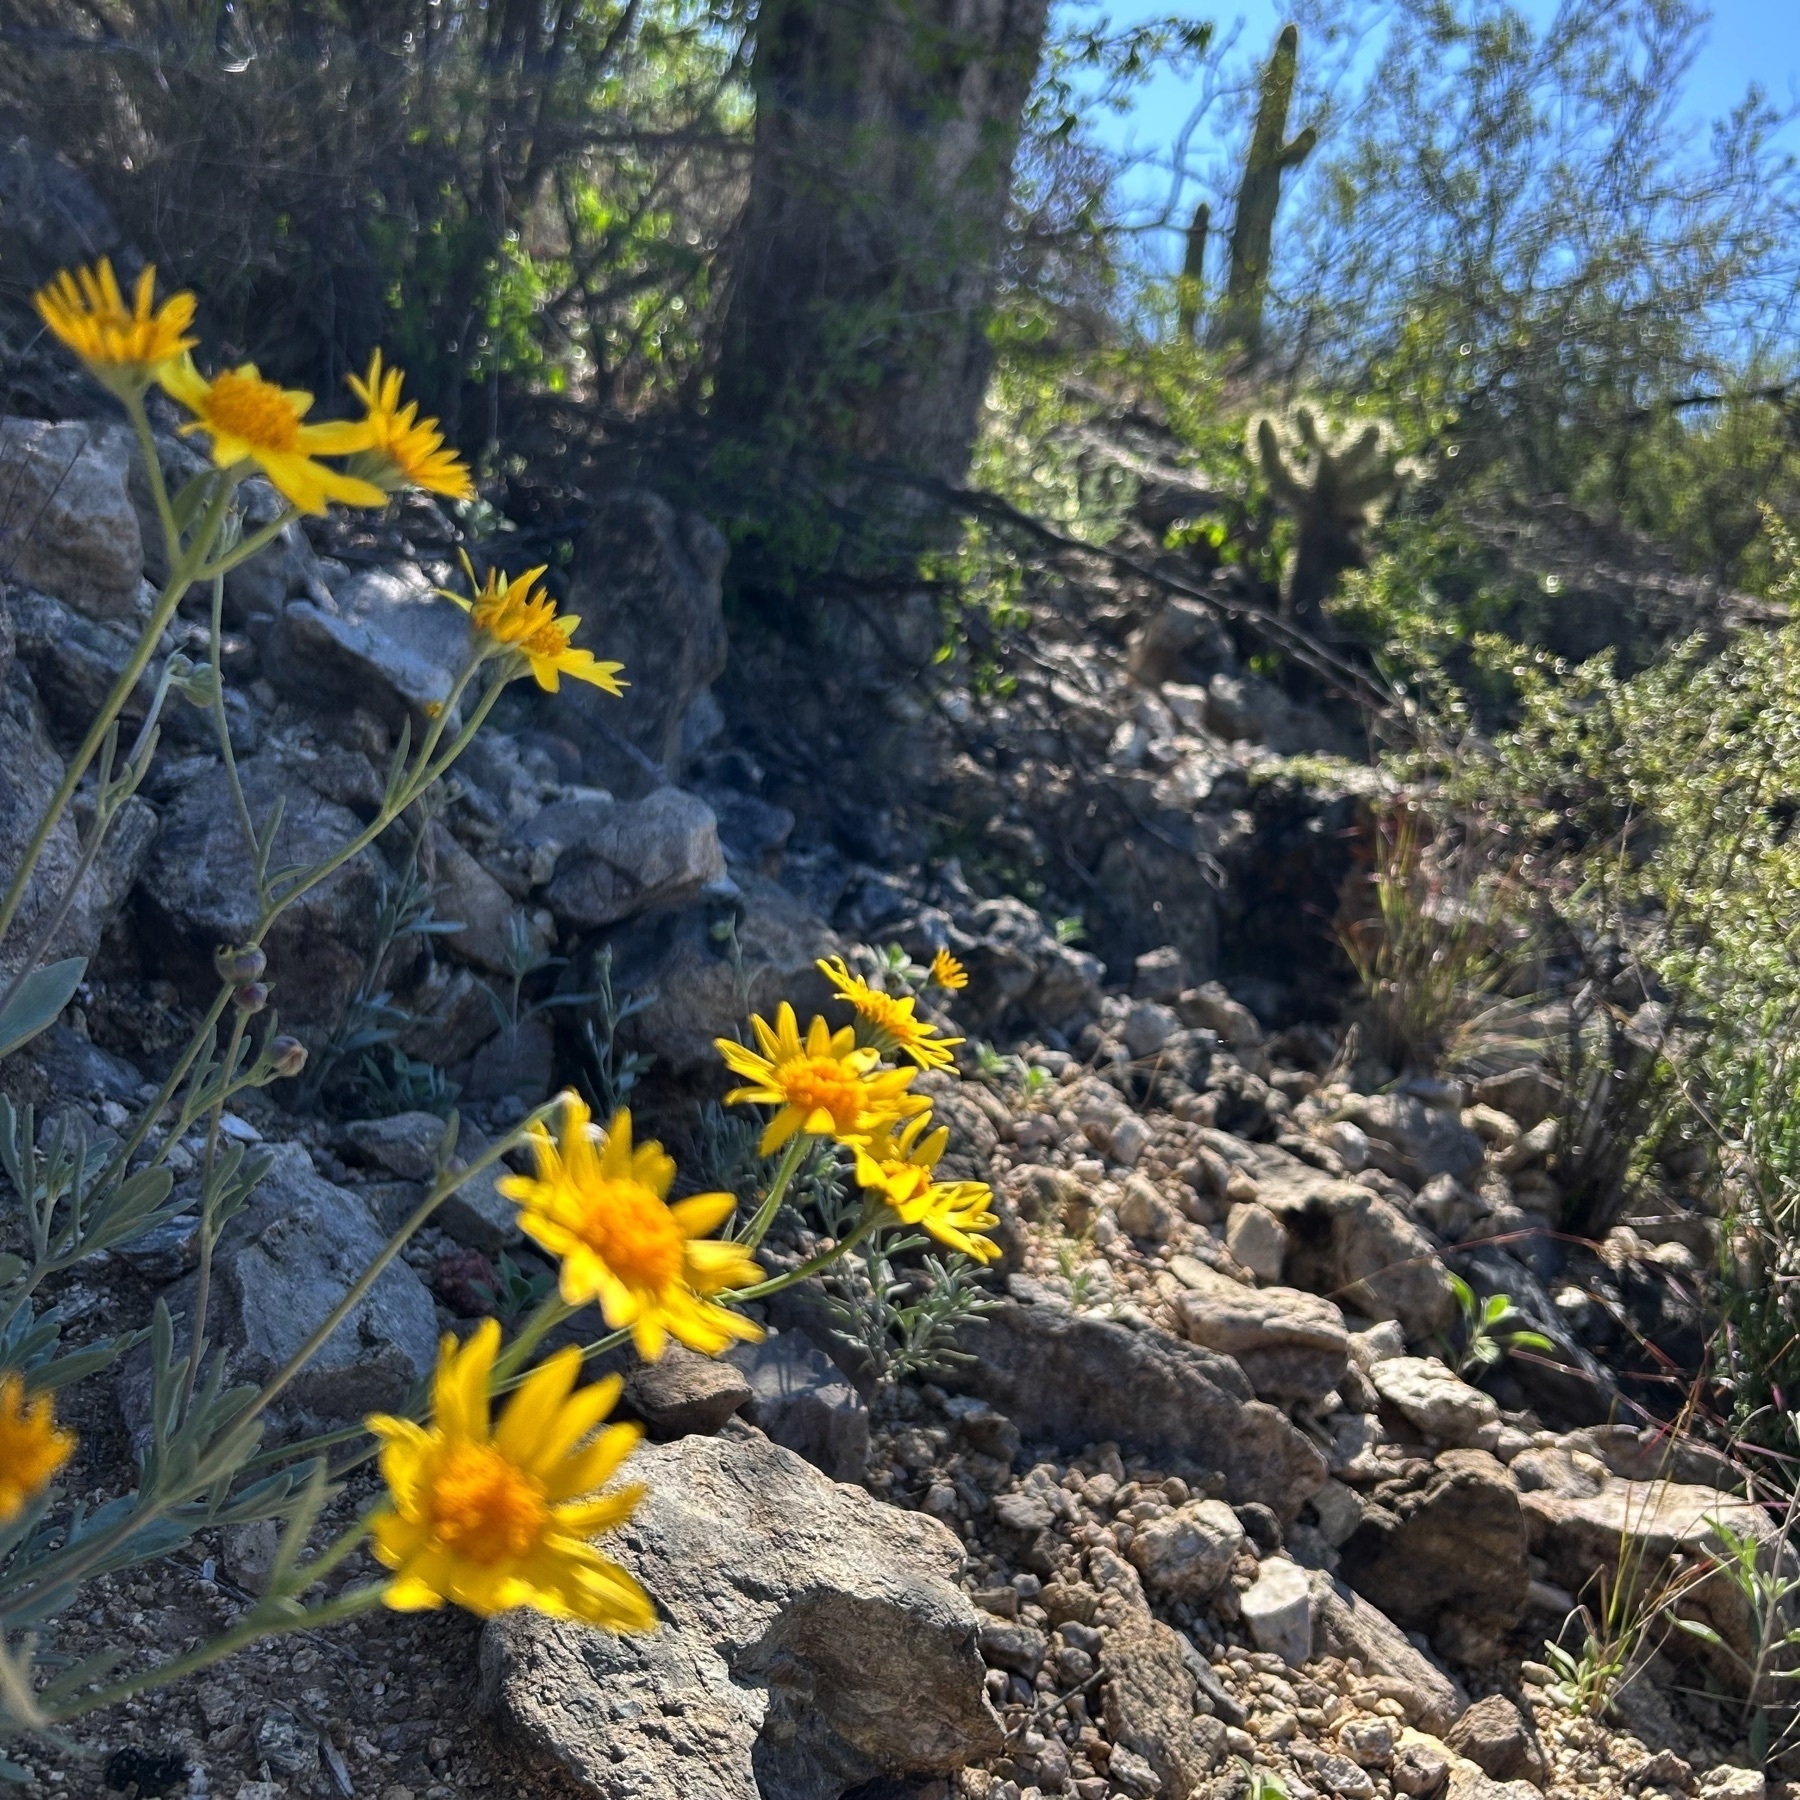 Yellow flowers on a desert hillside with cactus, rocks, and other plants.